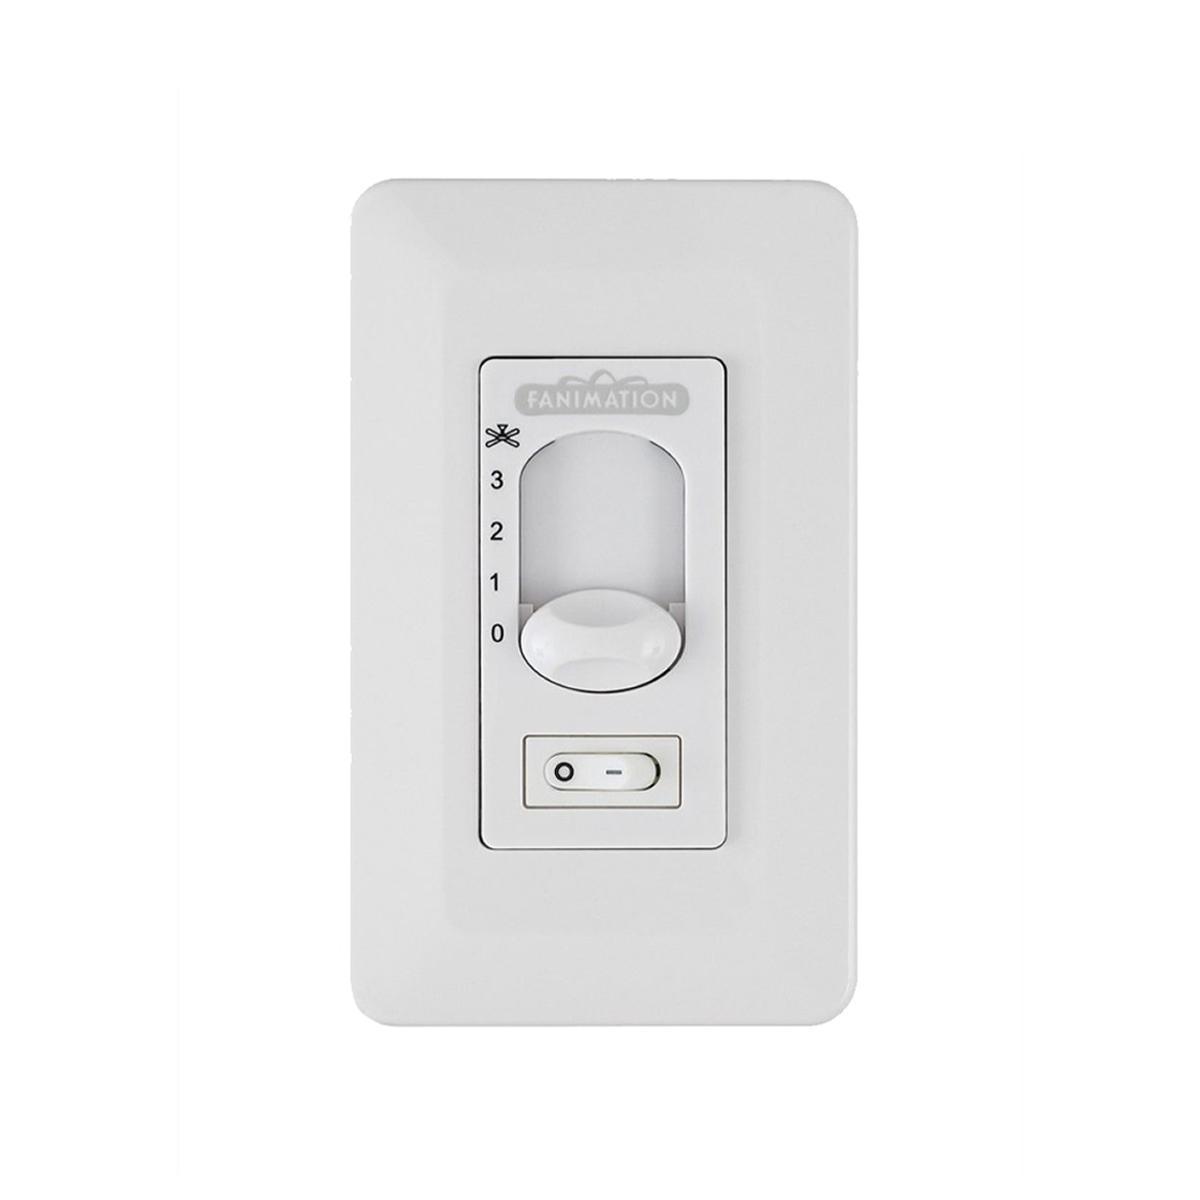 3-Speed Ceiling Fan And Toggle ON/OFF Light Wall Control, White Finish - Bees Lighting